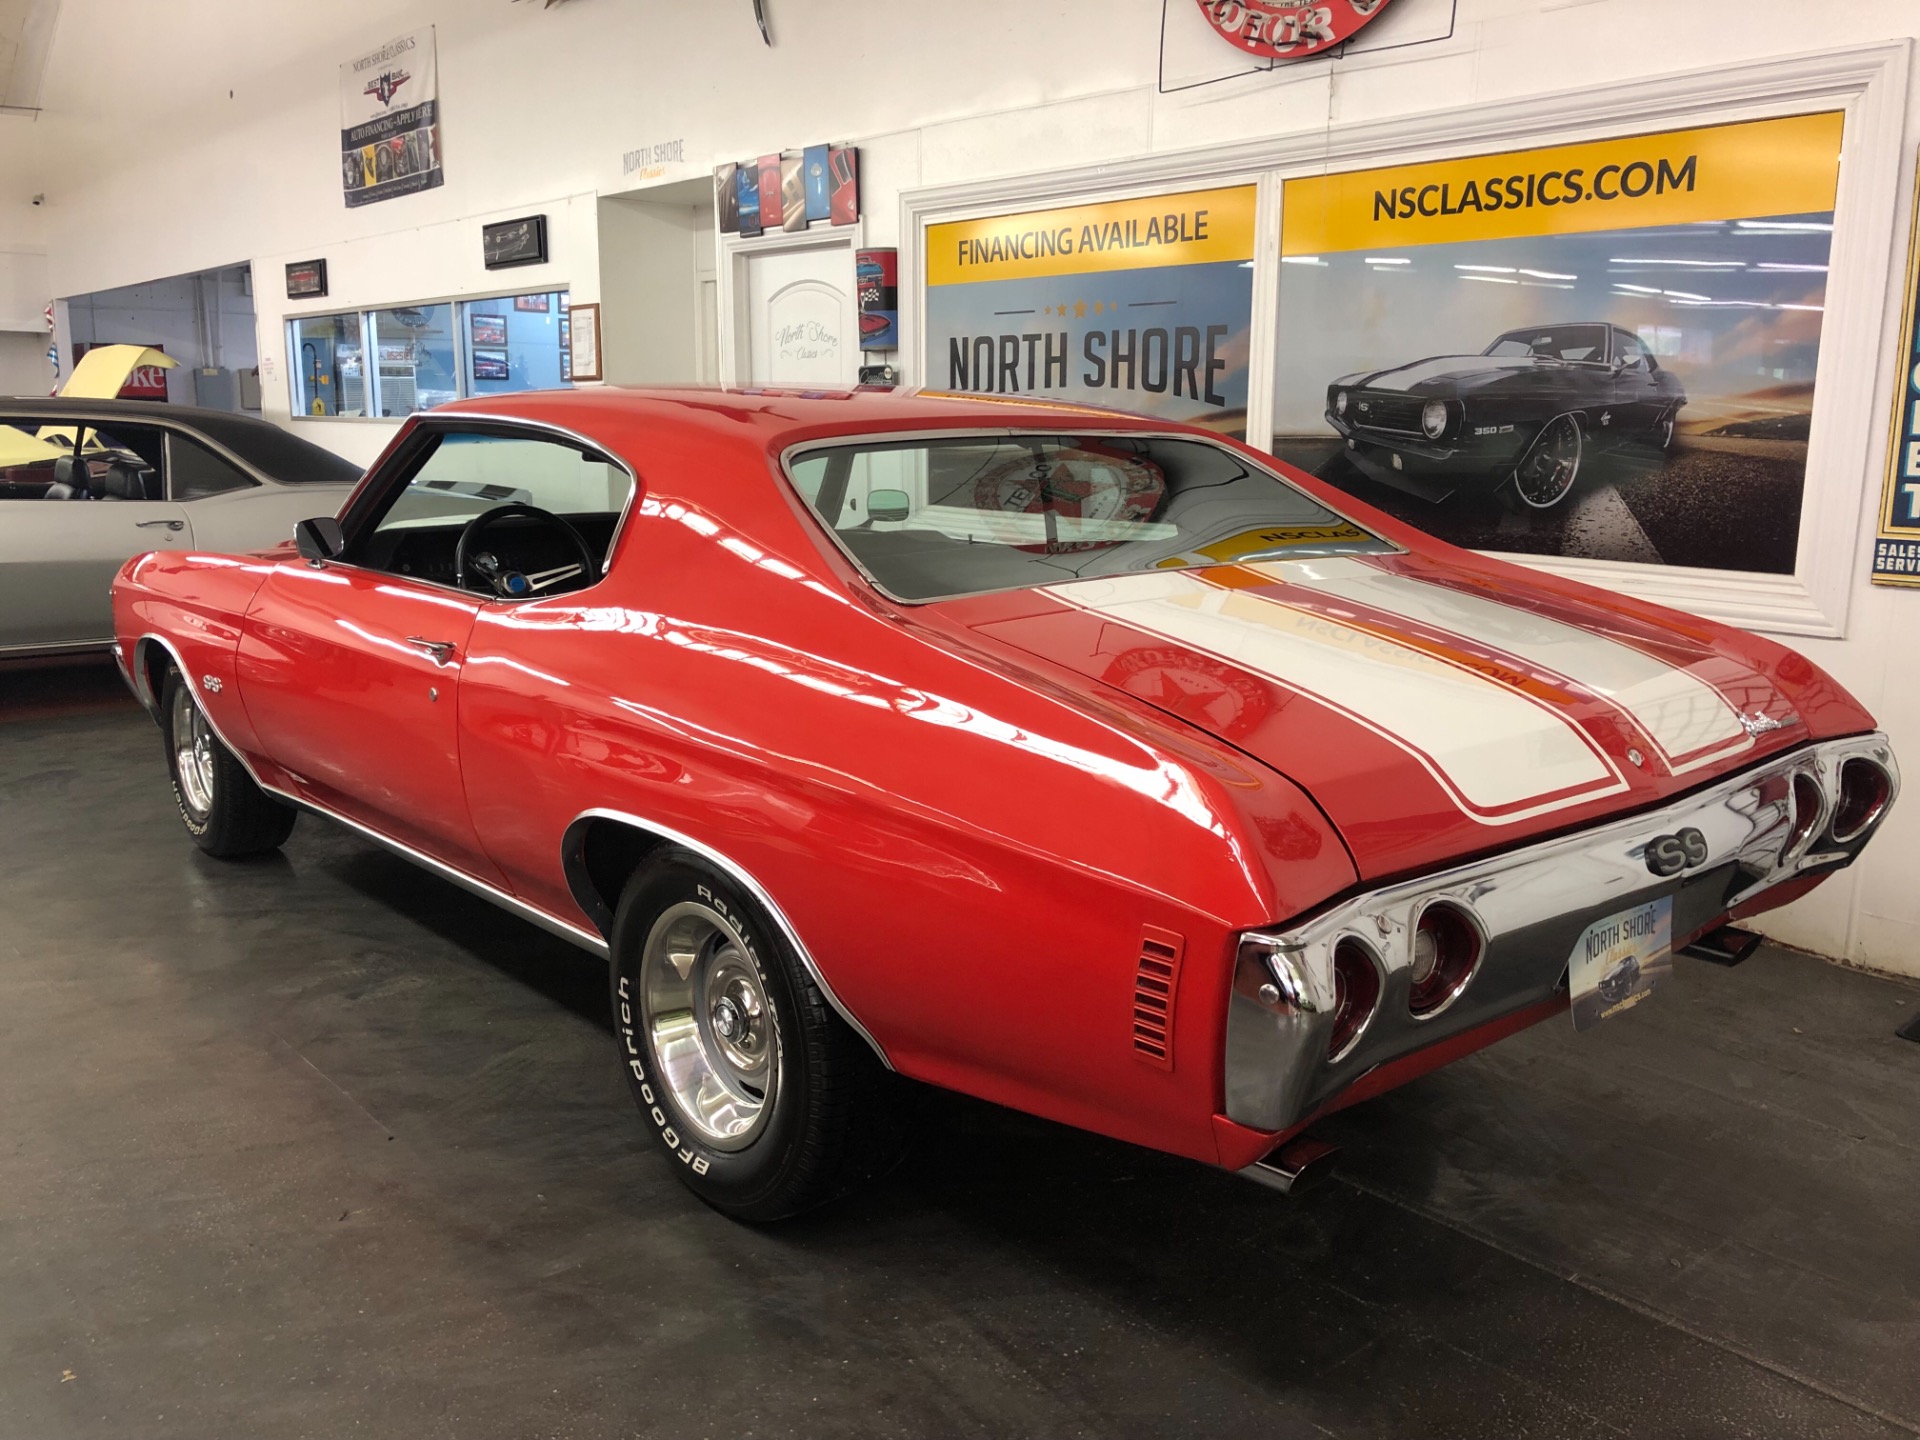 Used 1972 Chevrolet Chevelle -SUPER SPORT TRIBUTE - CUSTOM PEARL PAINT - A/C - NEW ENGINE | Mundelein, IL